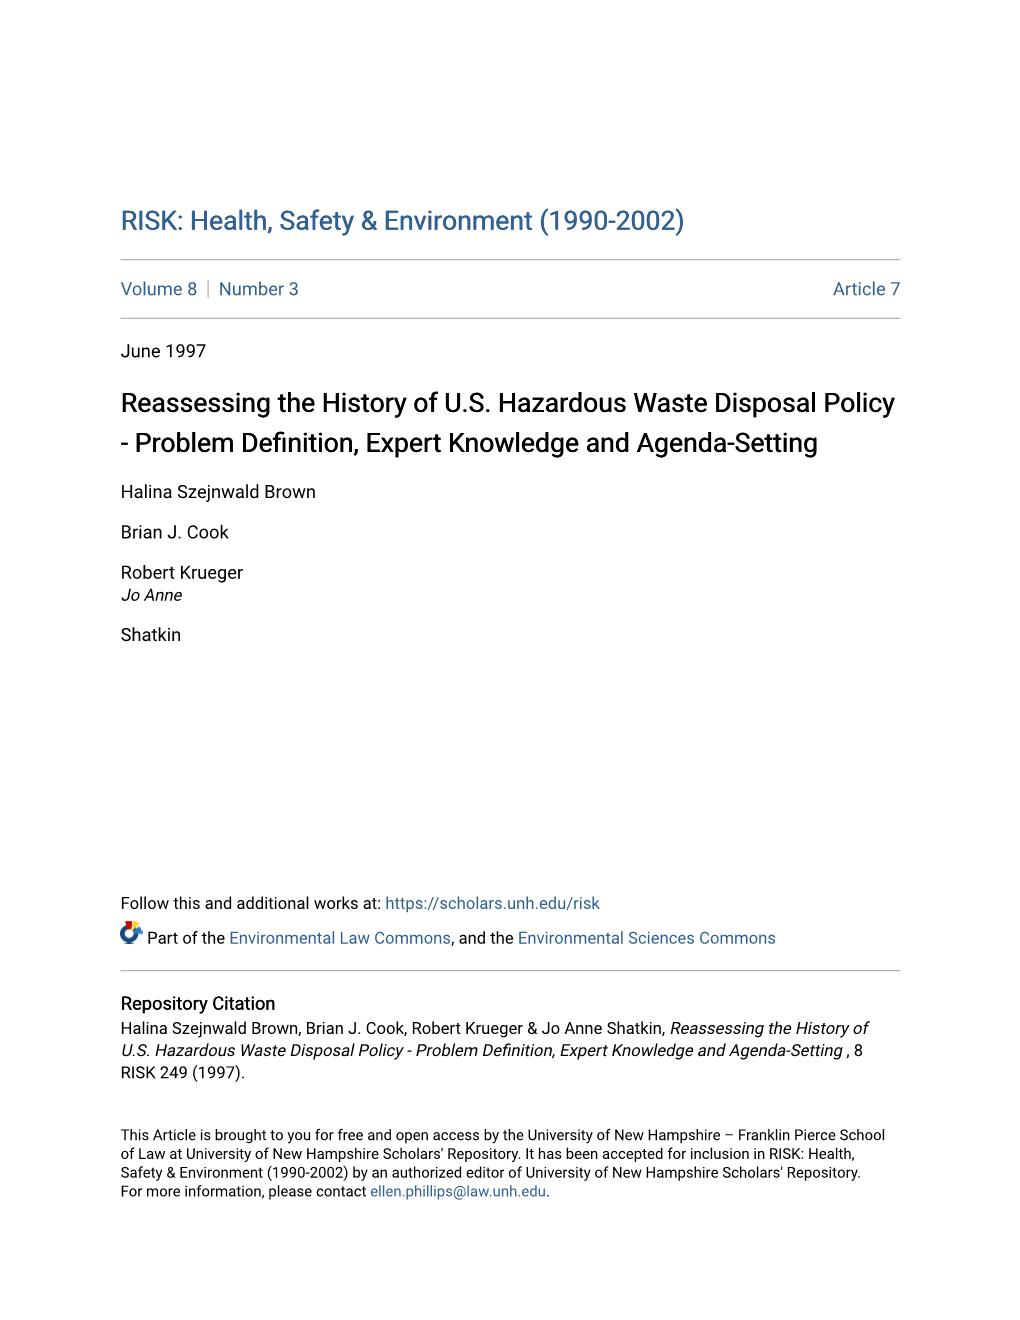 Reassessing the History of U.S. Hazardous Waste Disposal Policy - Problem Definition, Expert Knowledge and Agenda-Setting